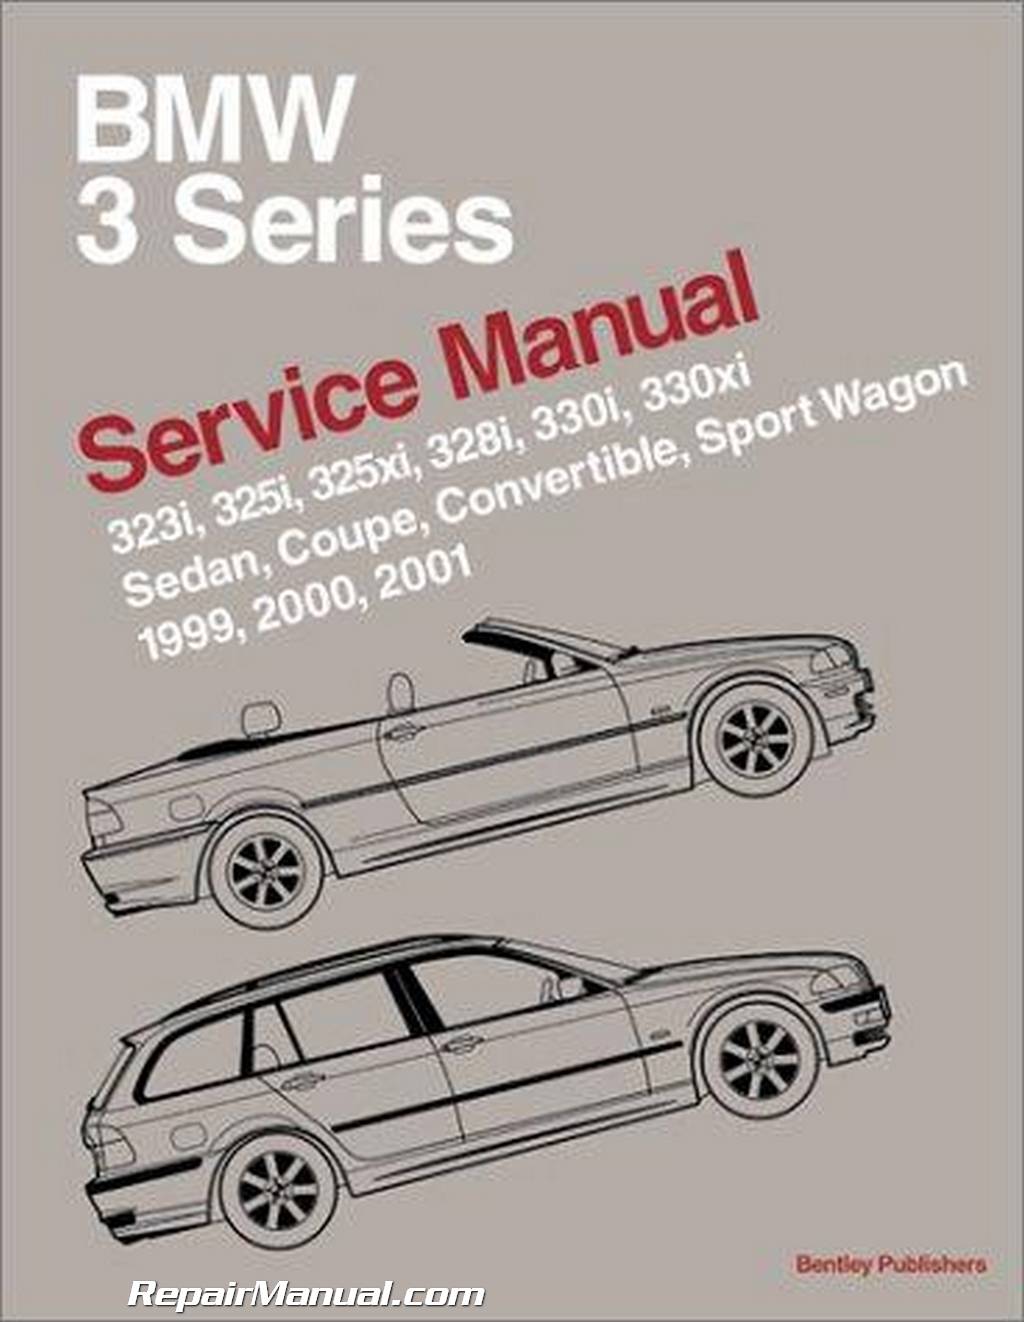 Bmw 3 Series E46 Service Manual Download treearticle